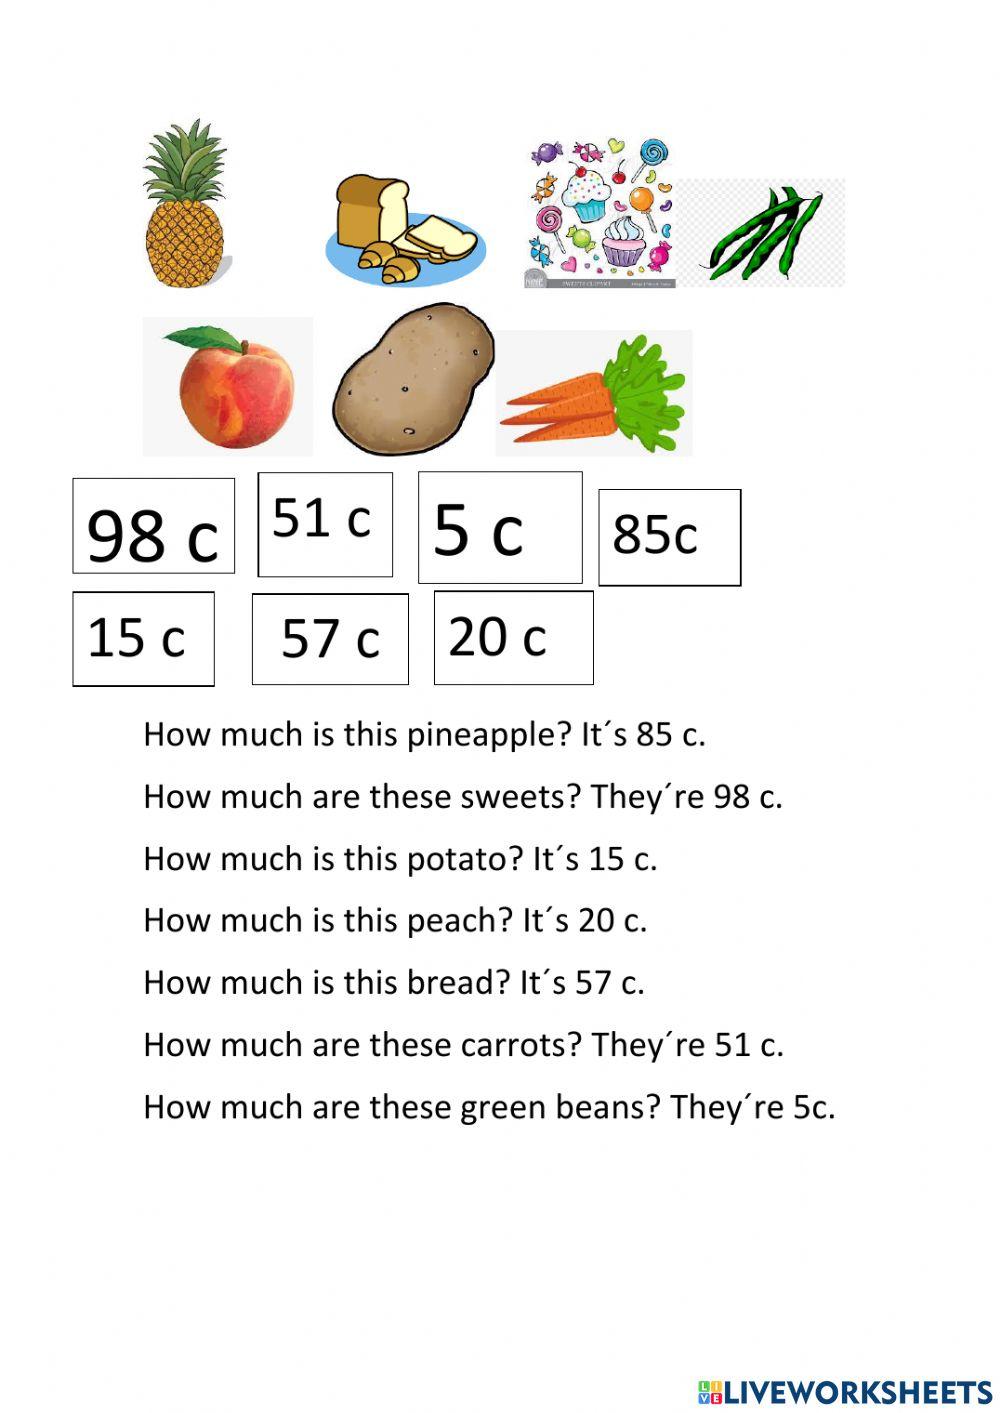 Food topic revision